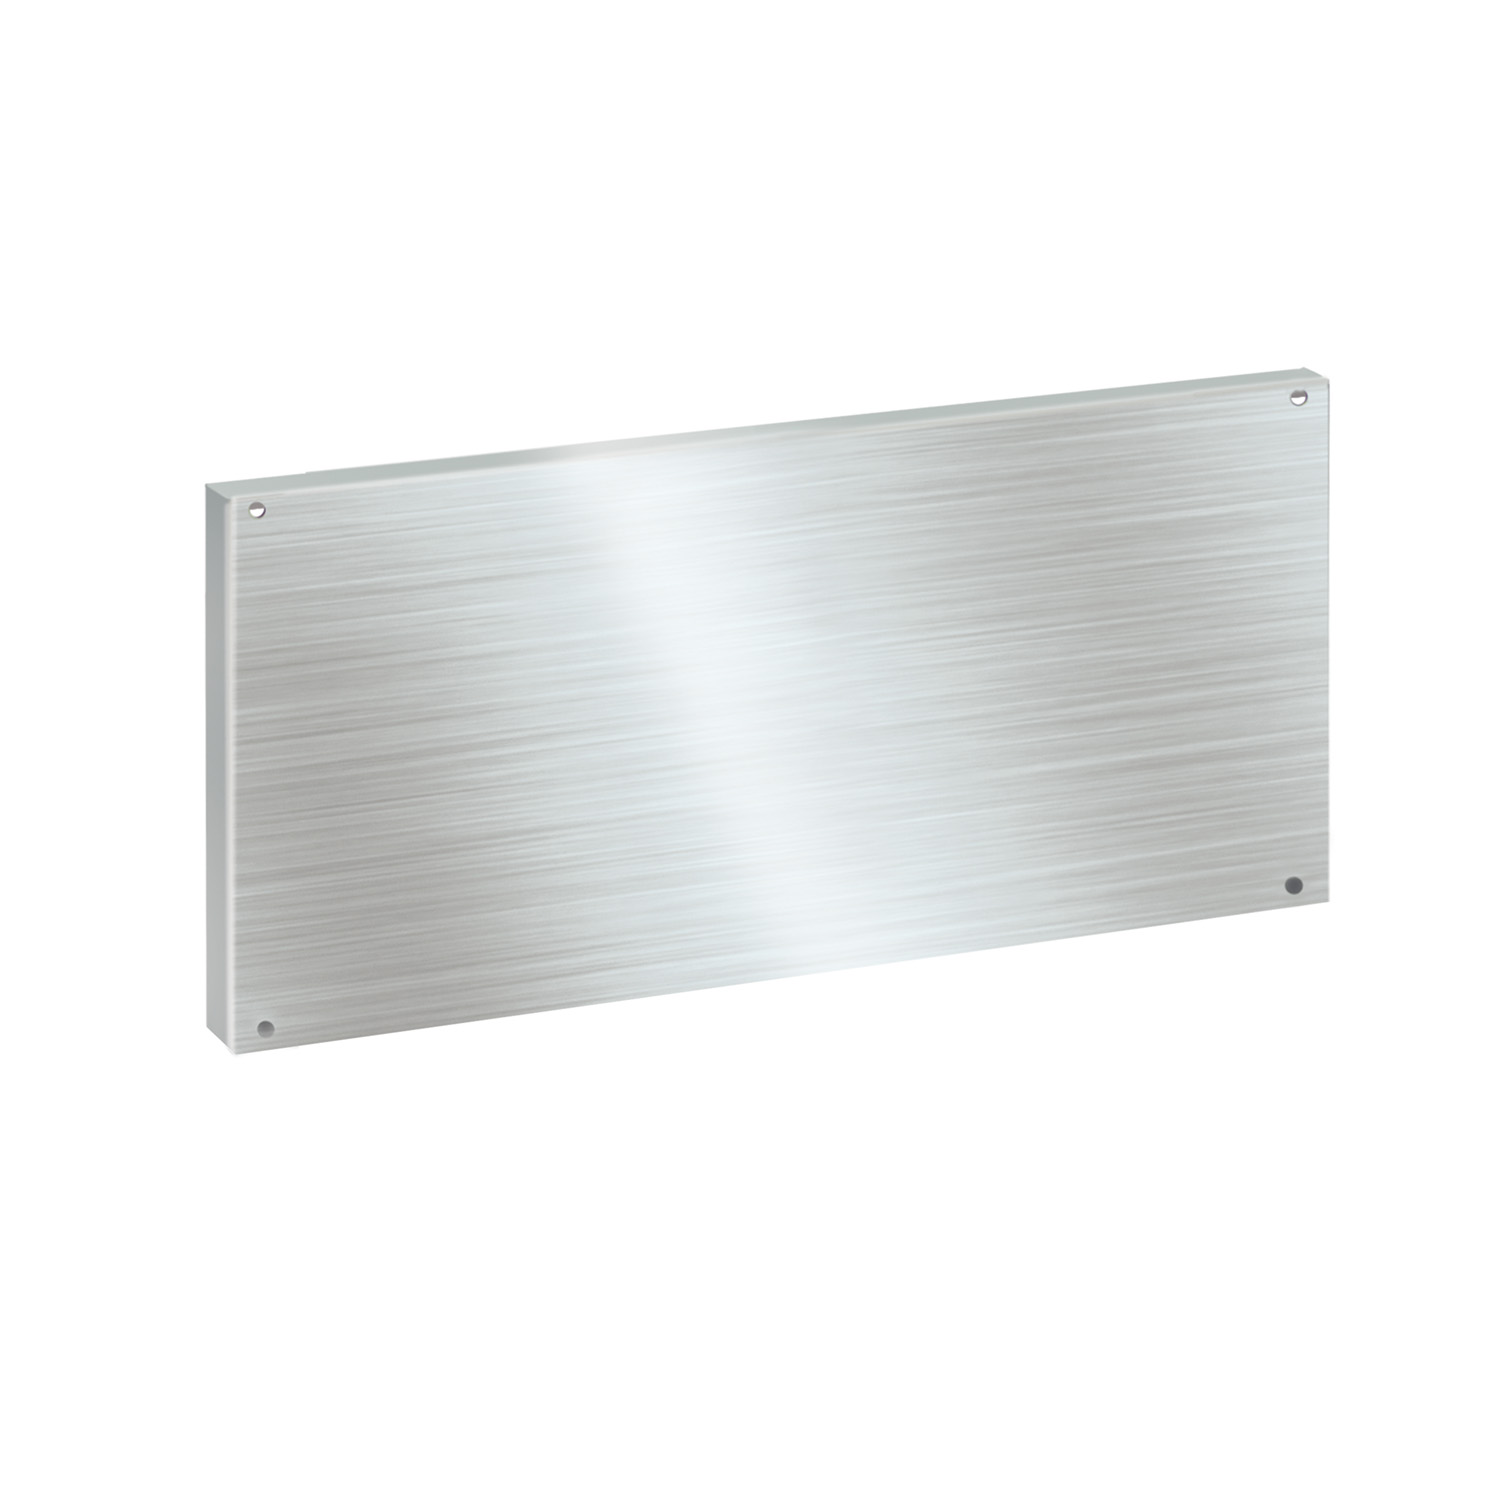 Stainless steel back panel (300 x 600mm)